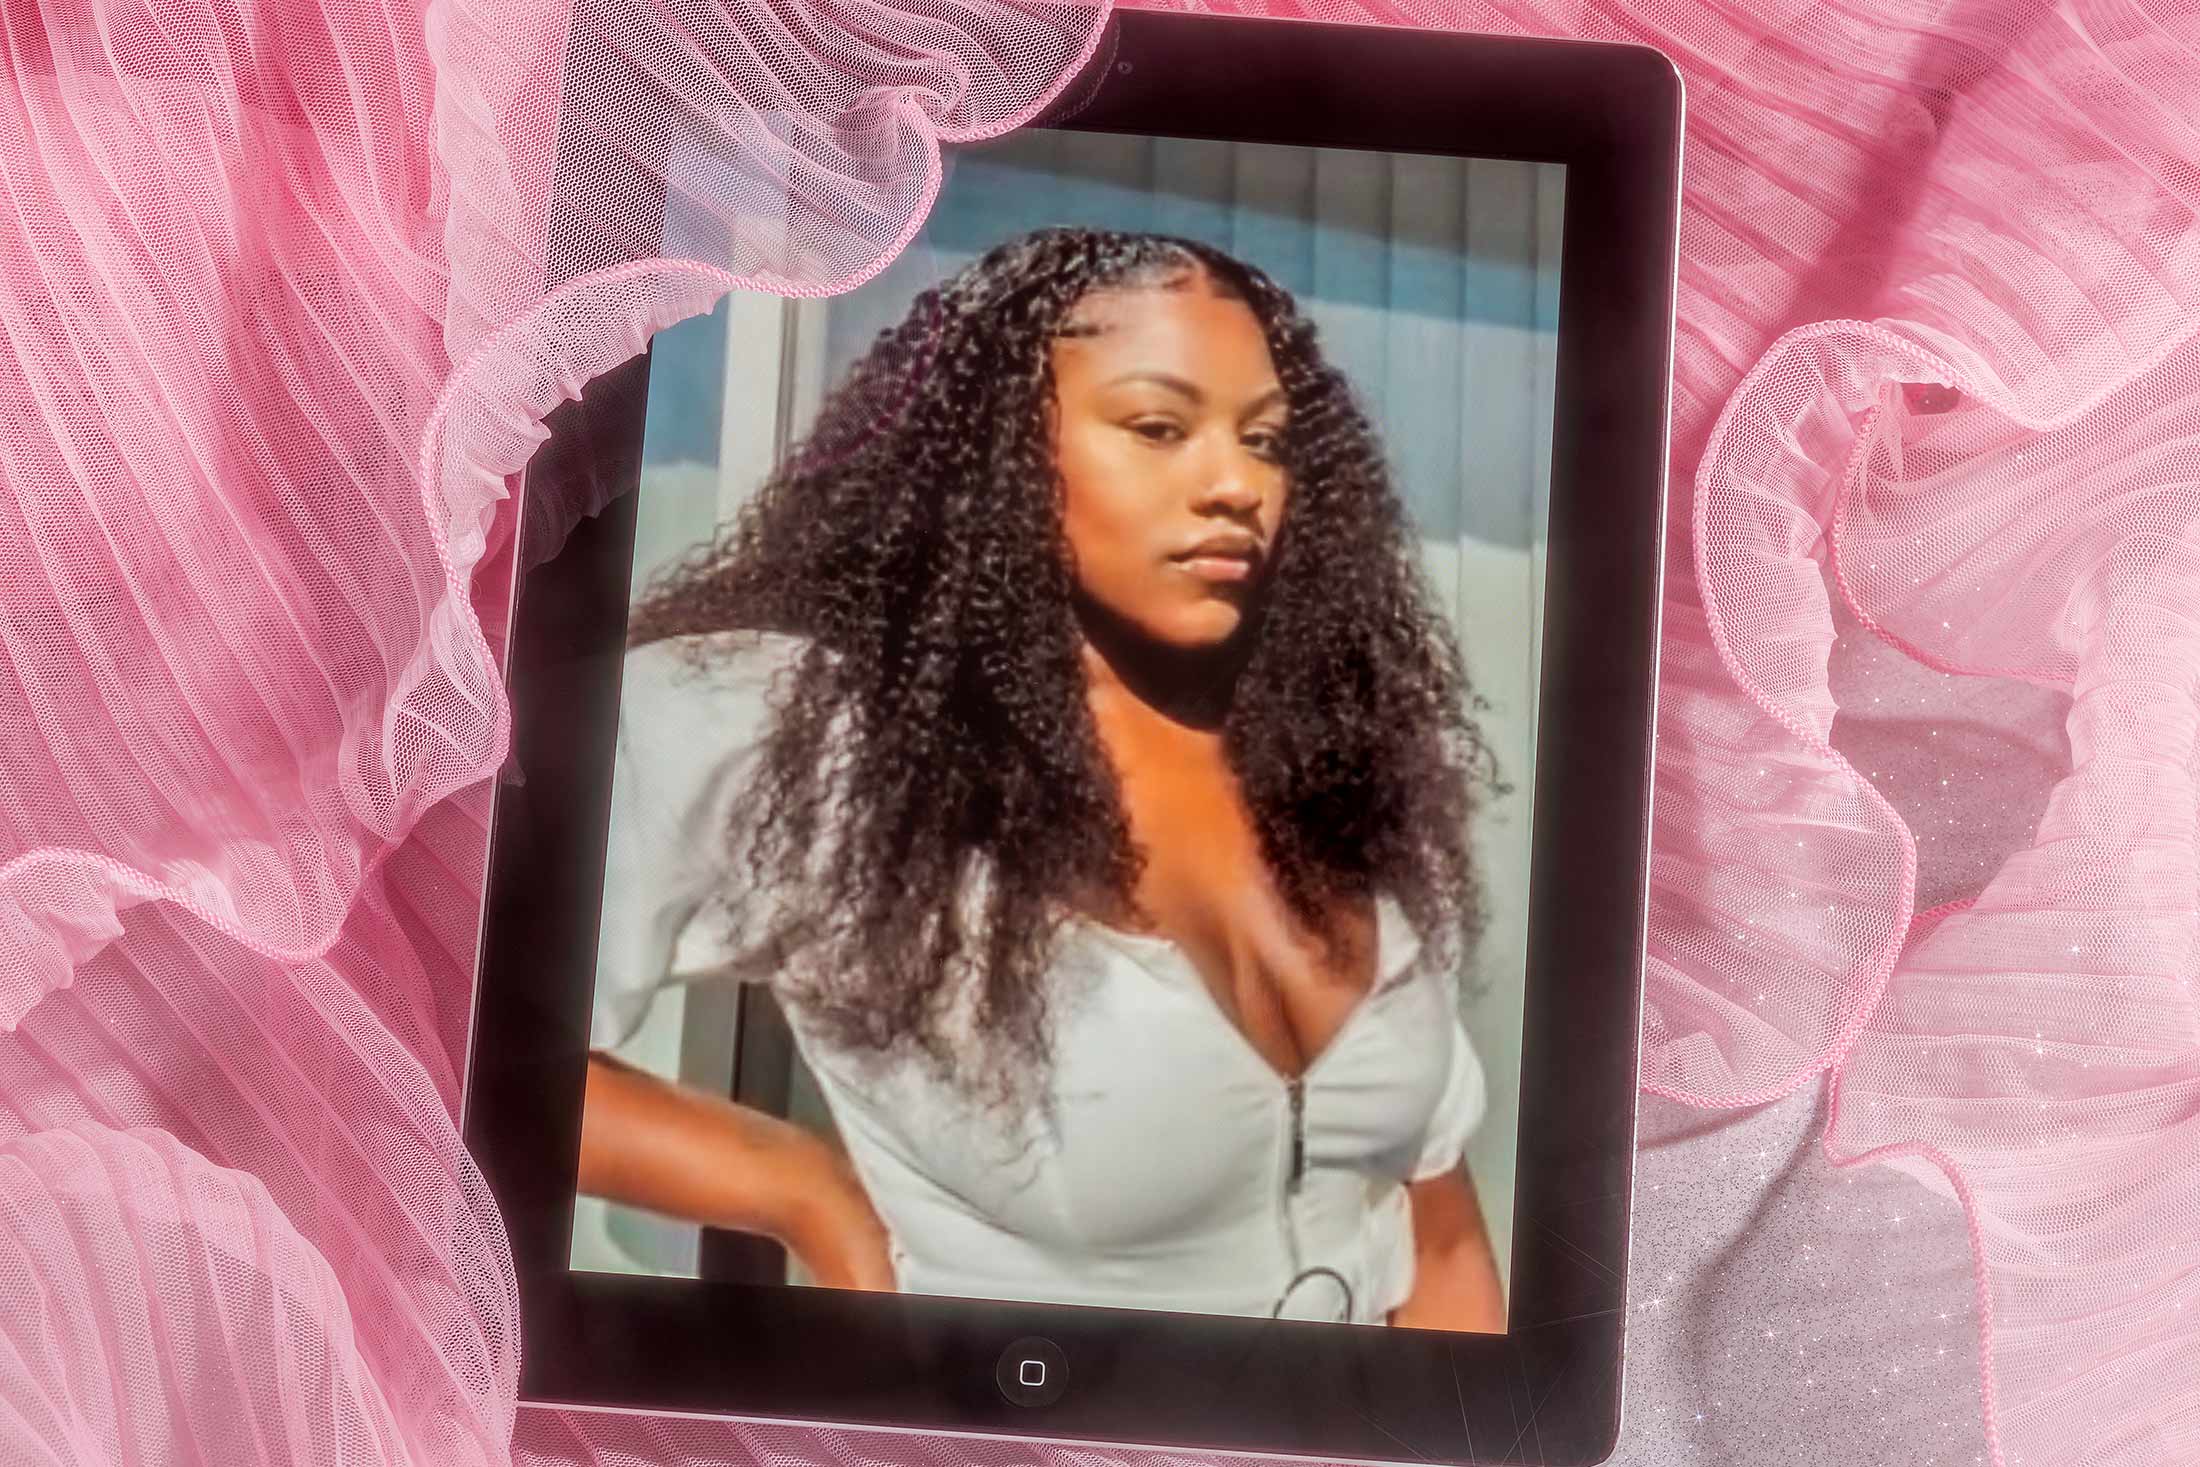 Sydnee McRae, 1.1 million TikTok followers:&nbsp;“I was telling one of the big managers that I was doing $500 as a minimum. She was like, no, you should be at like $5,000 per video.”